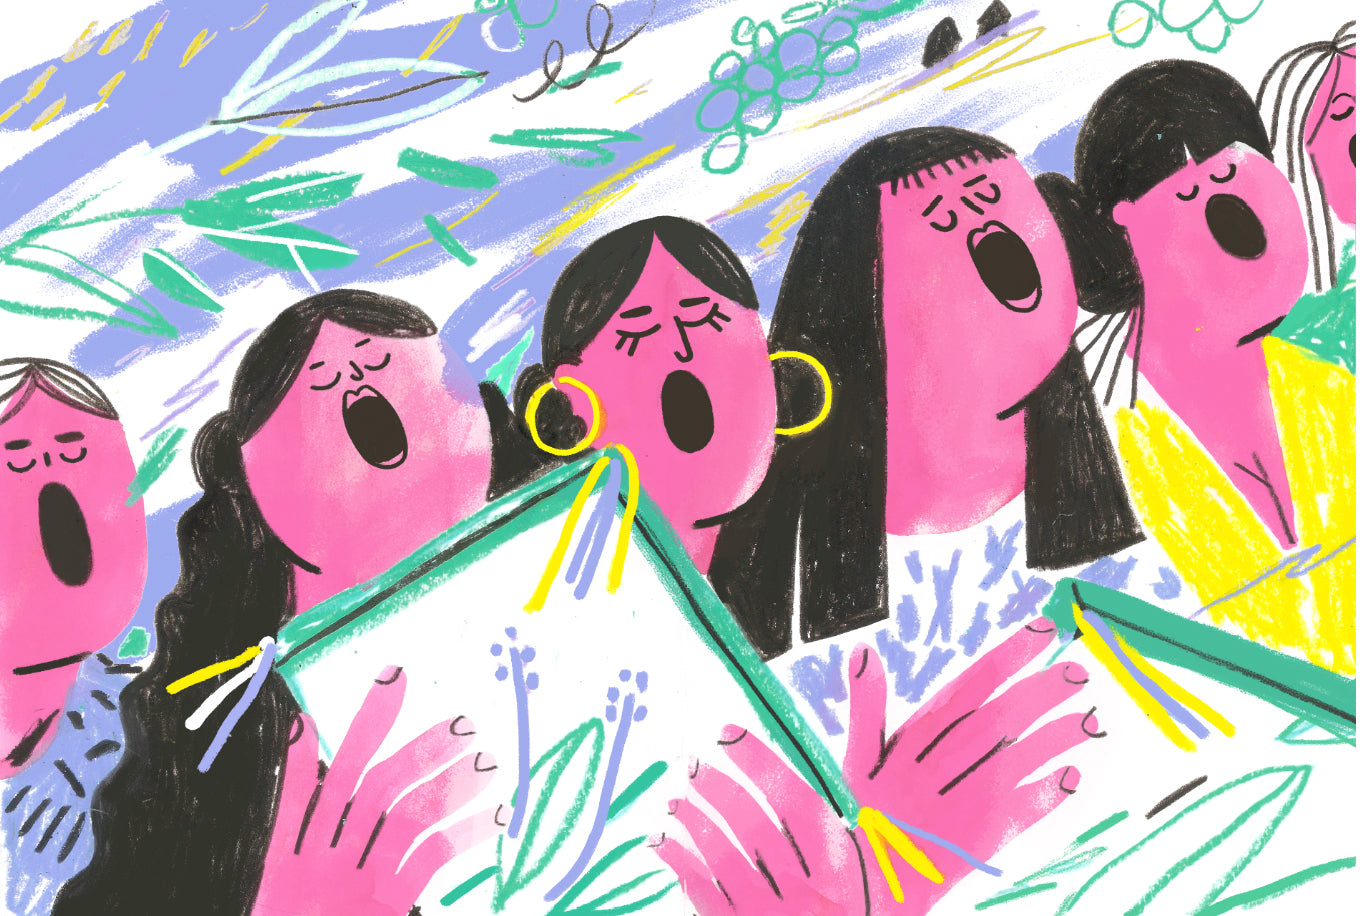 "The people around" Illustration Workshop with Gabriela in Porto, Portugal